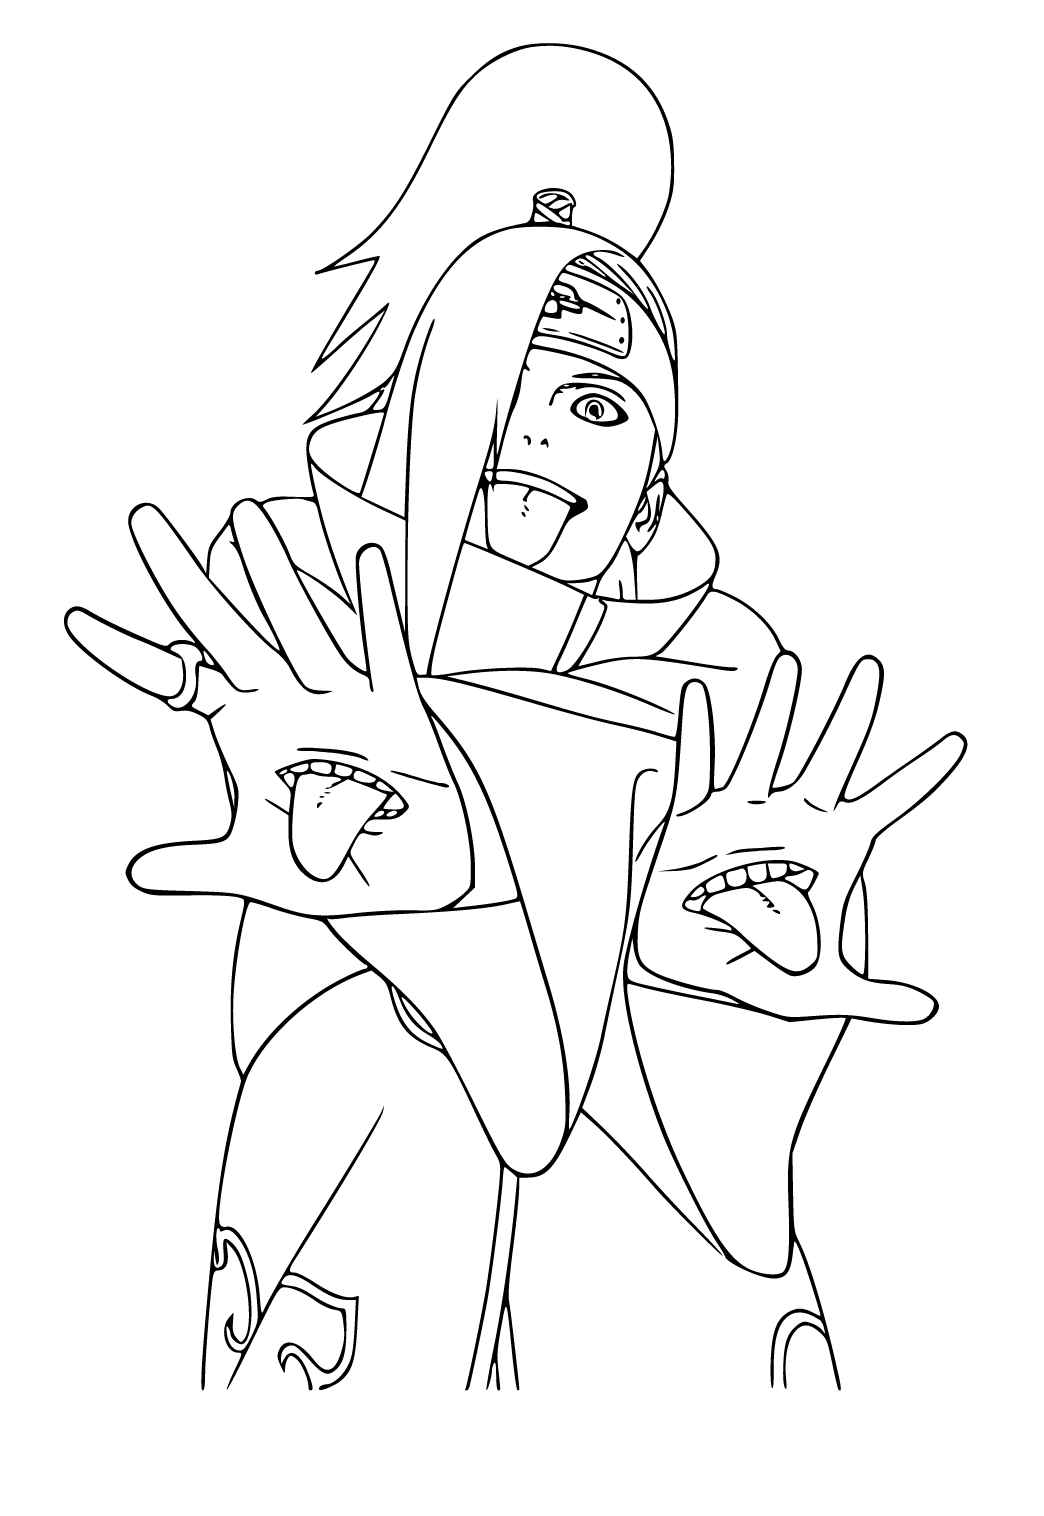 Free Printable Naruto Crazy Deidara Coloring Page, Sheet and Picture for  Adults and Kids (Girls and Boys) - Babeled.com